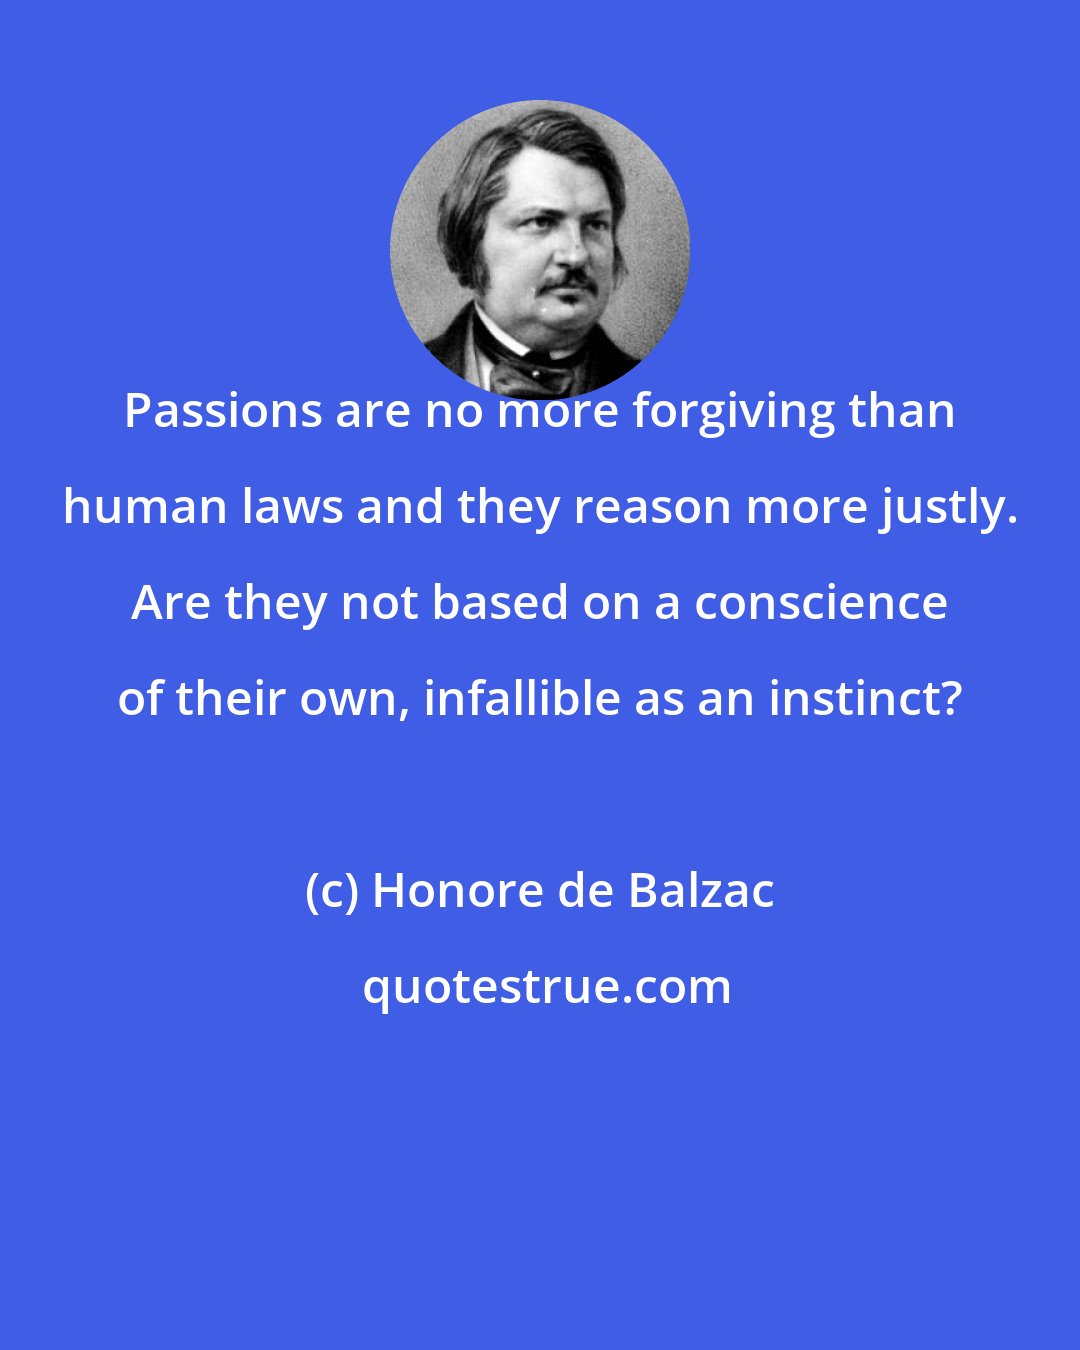 Honore de Balzac: Passions are no more forgiving than human laws and they reason more justly. Are they not based on a conscience of their own, infallible as an instinct?